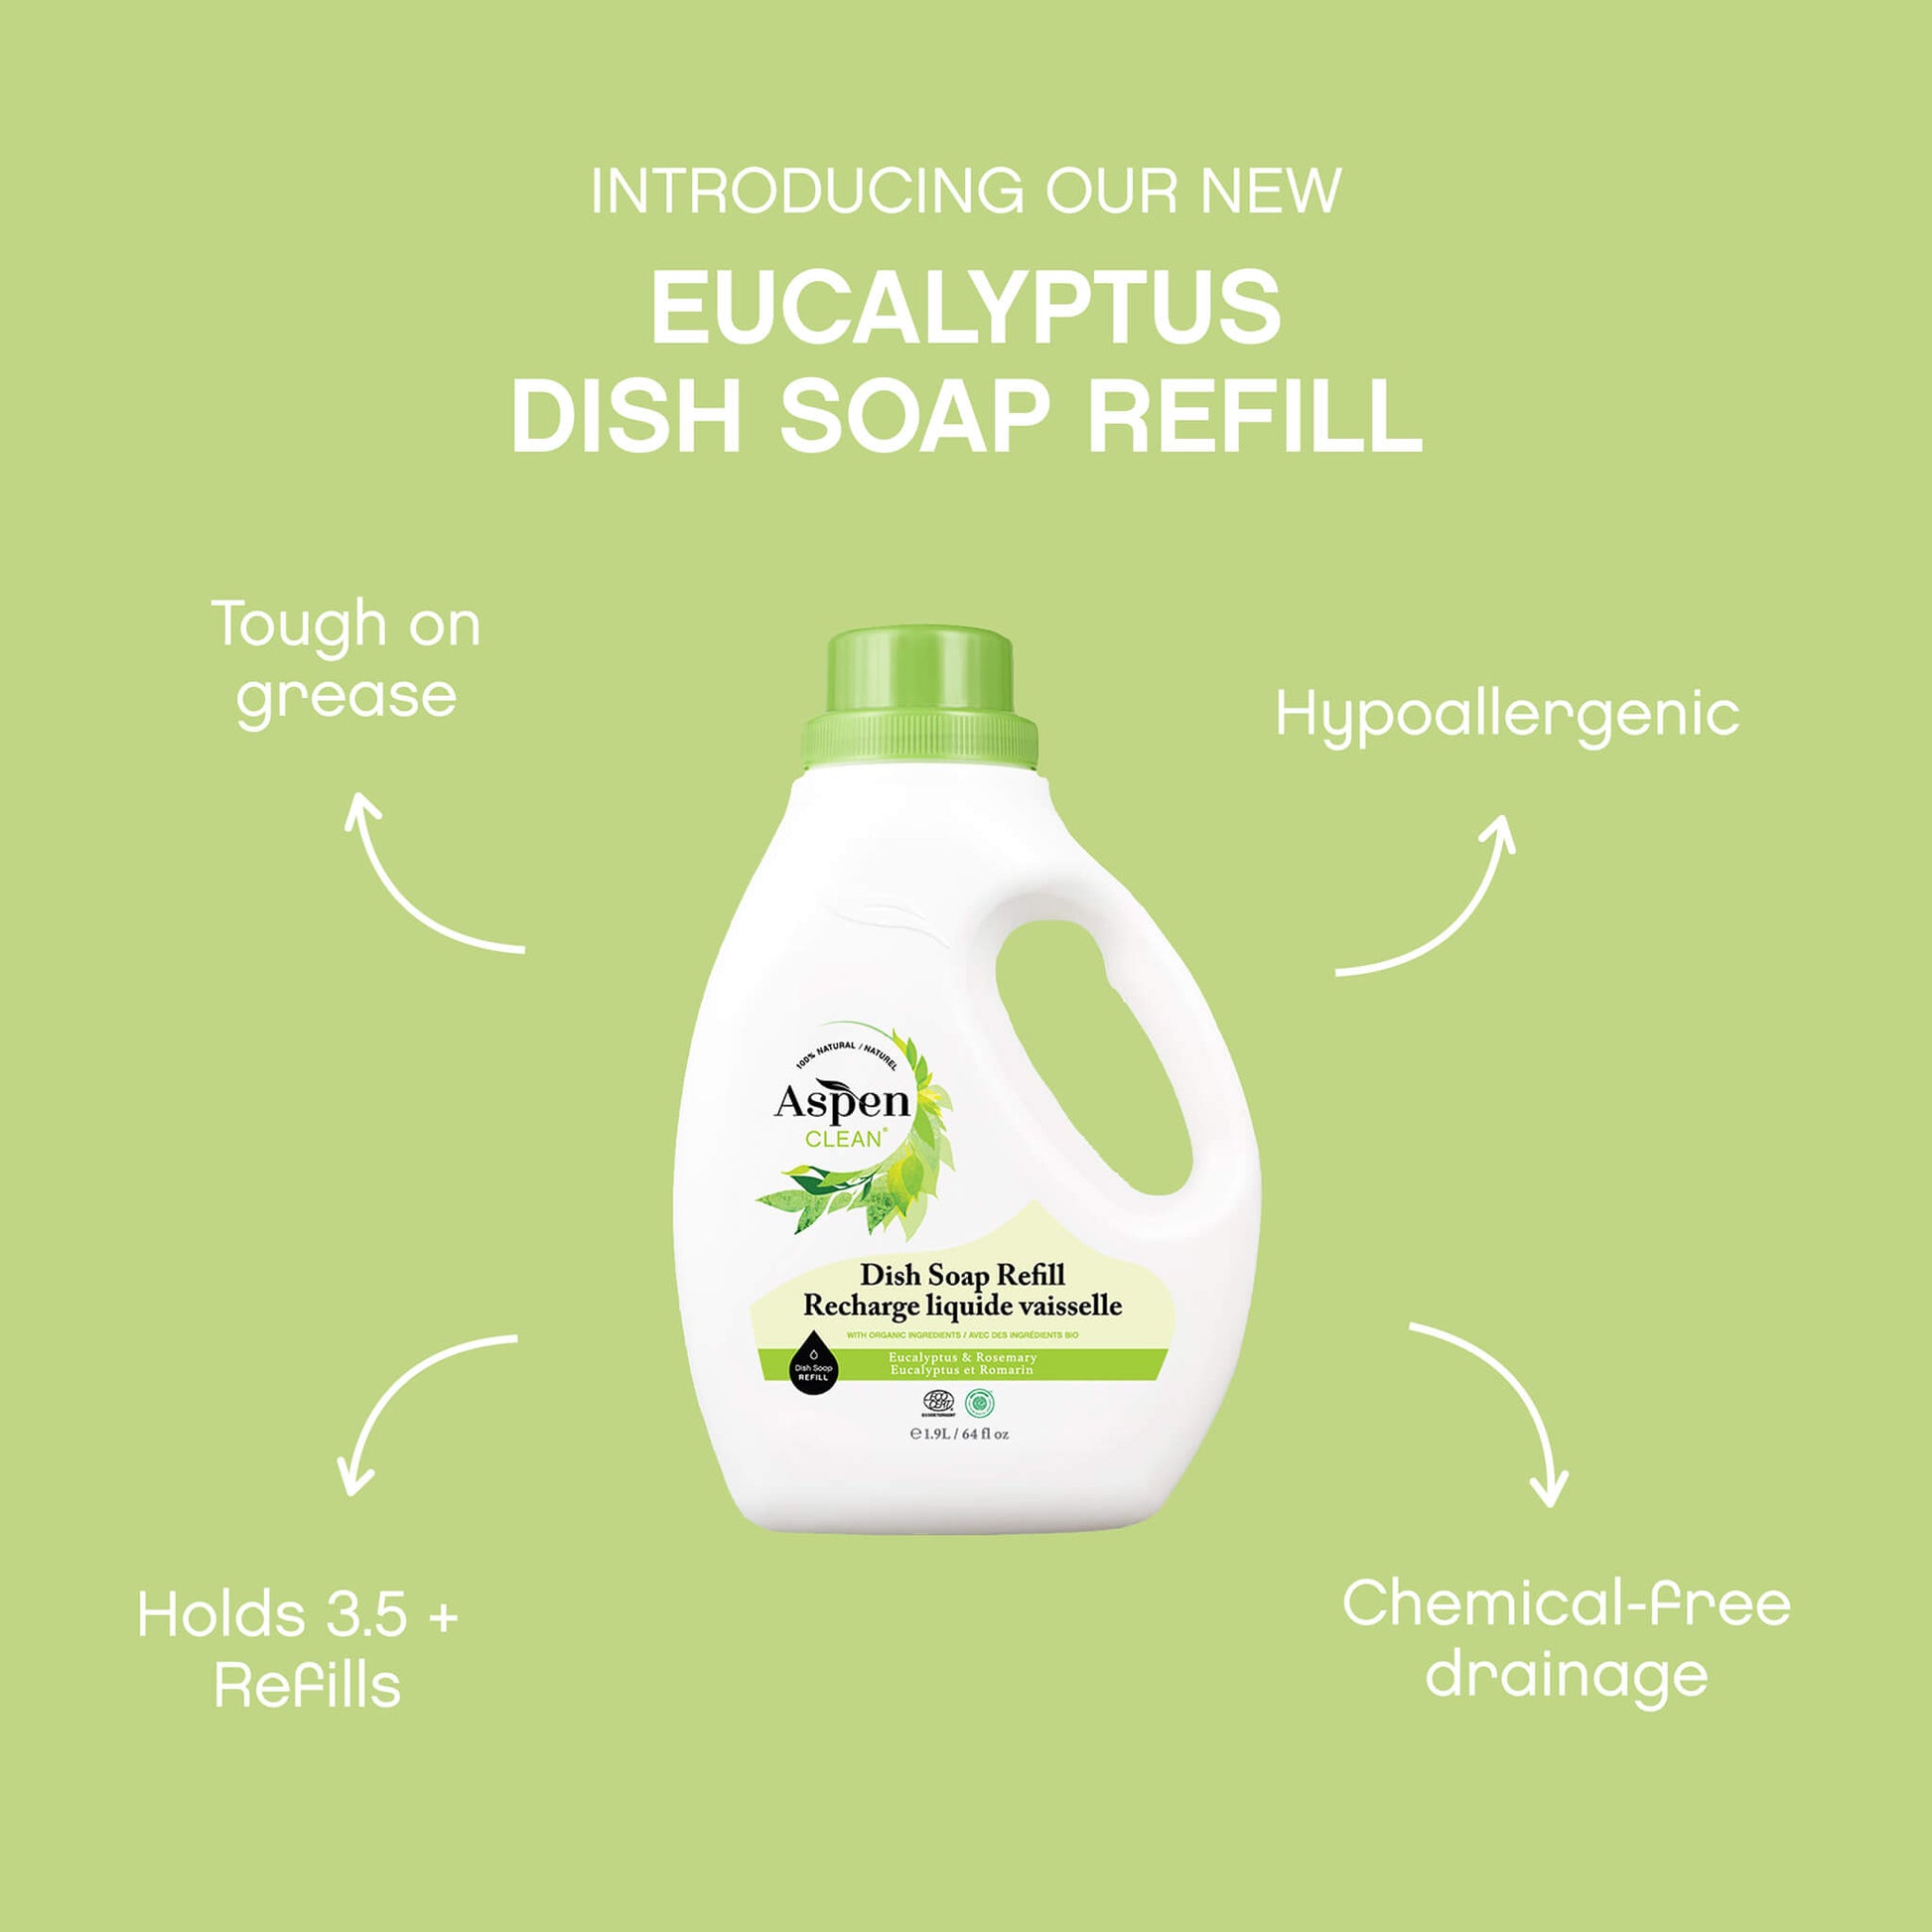 AspenClean refill dish soap Eucalyptus is hypoallergenic, chemical-free drainage, and tough on grease.